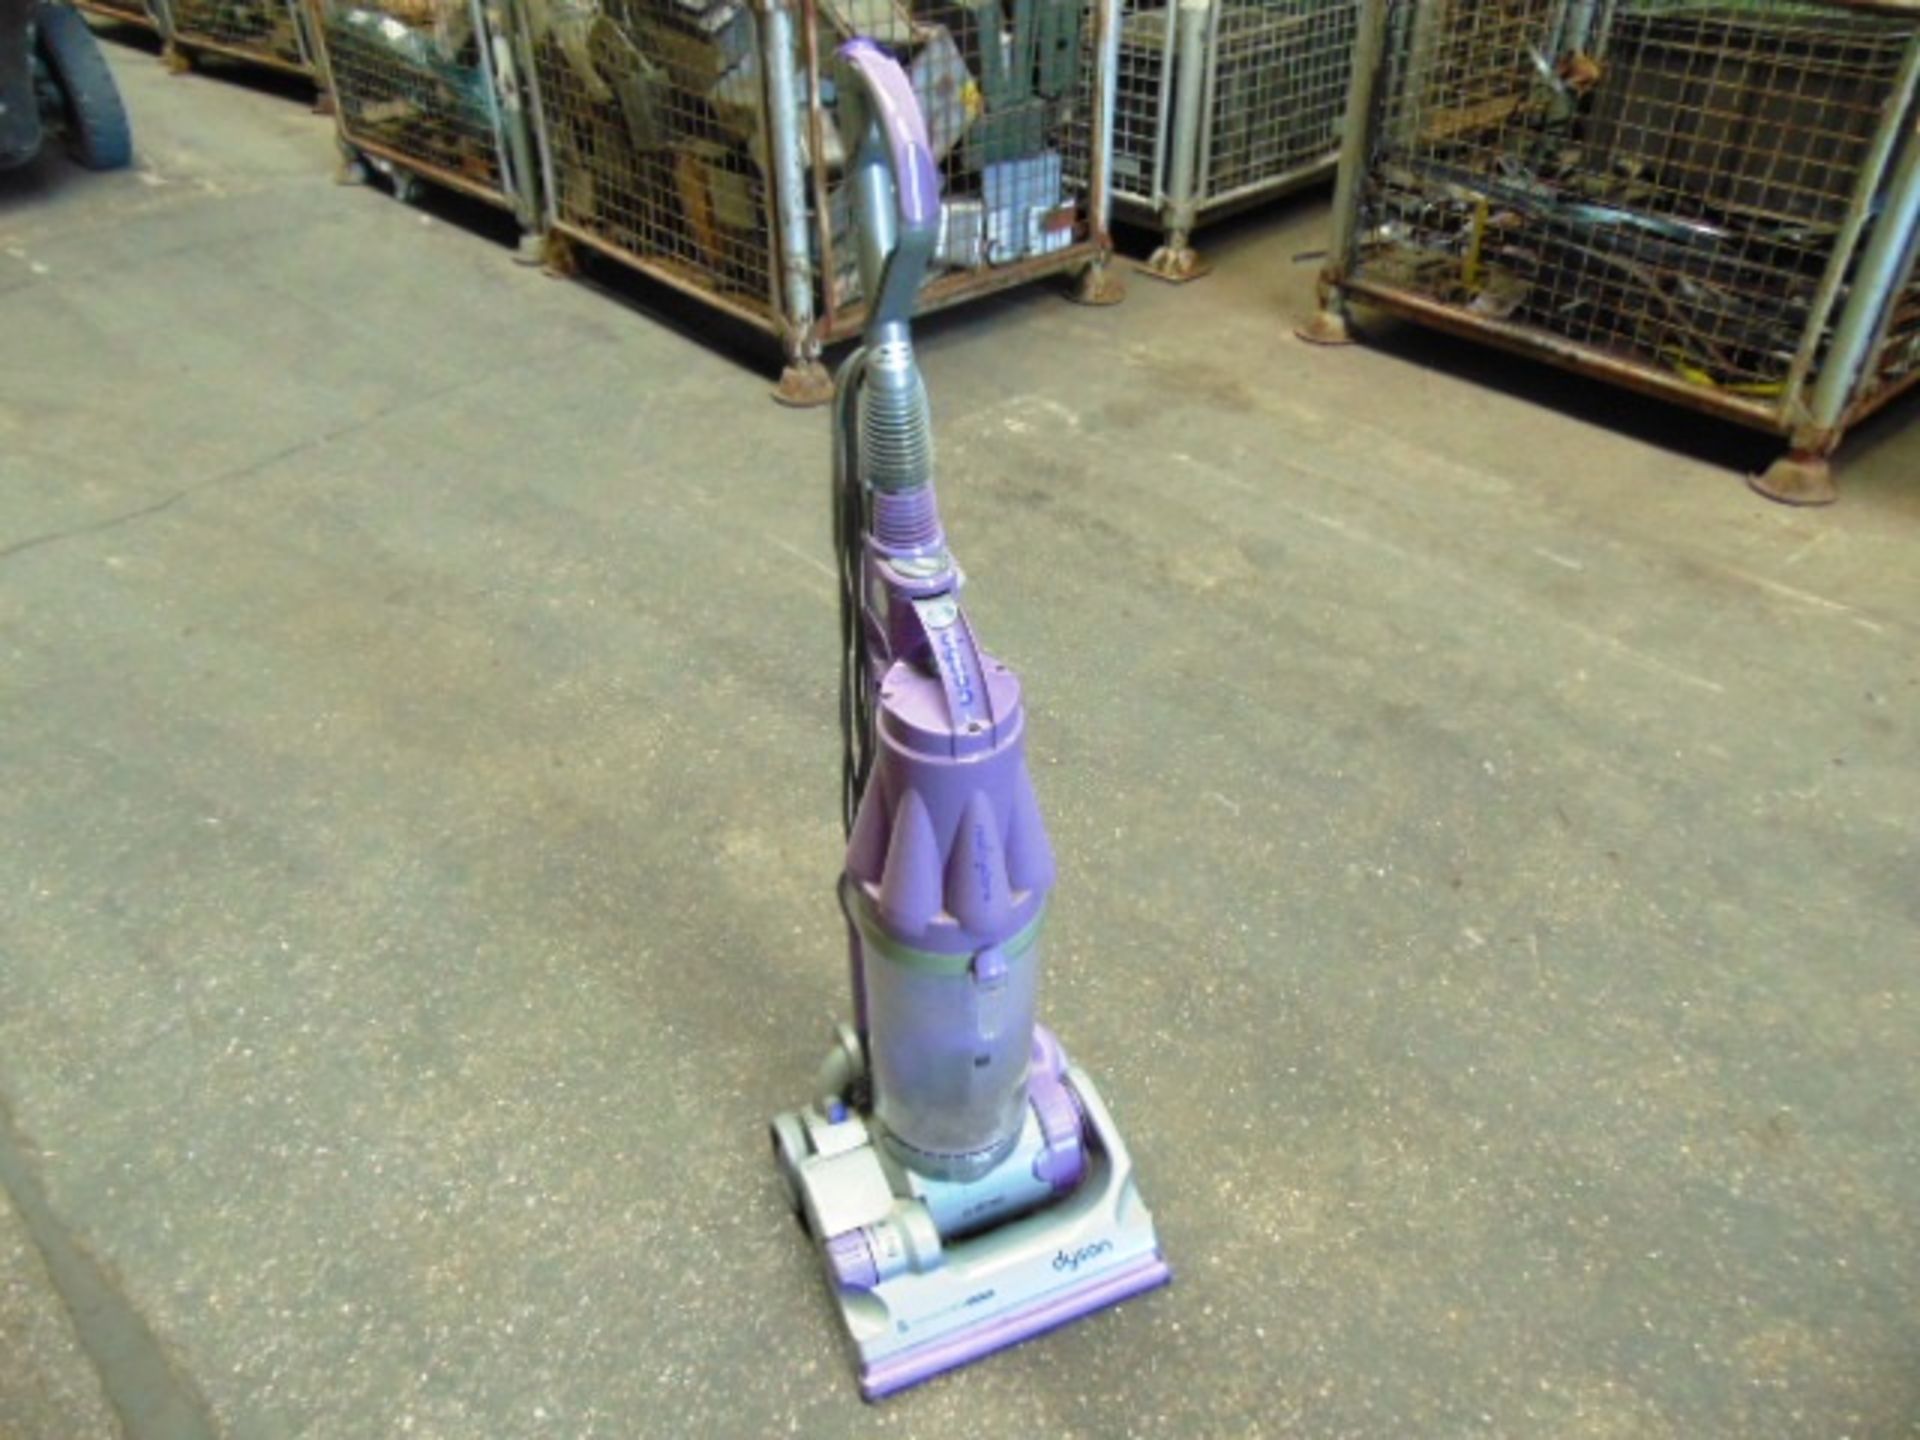 Dyson DCO7 Animal Upright Vacuum Cleaner